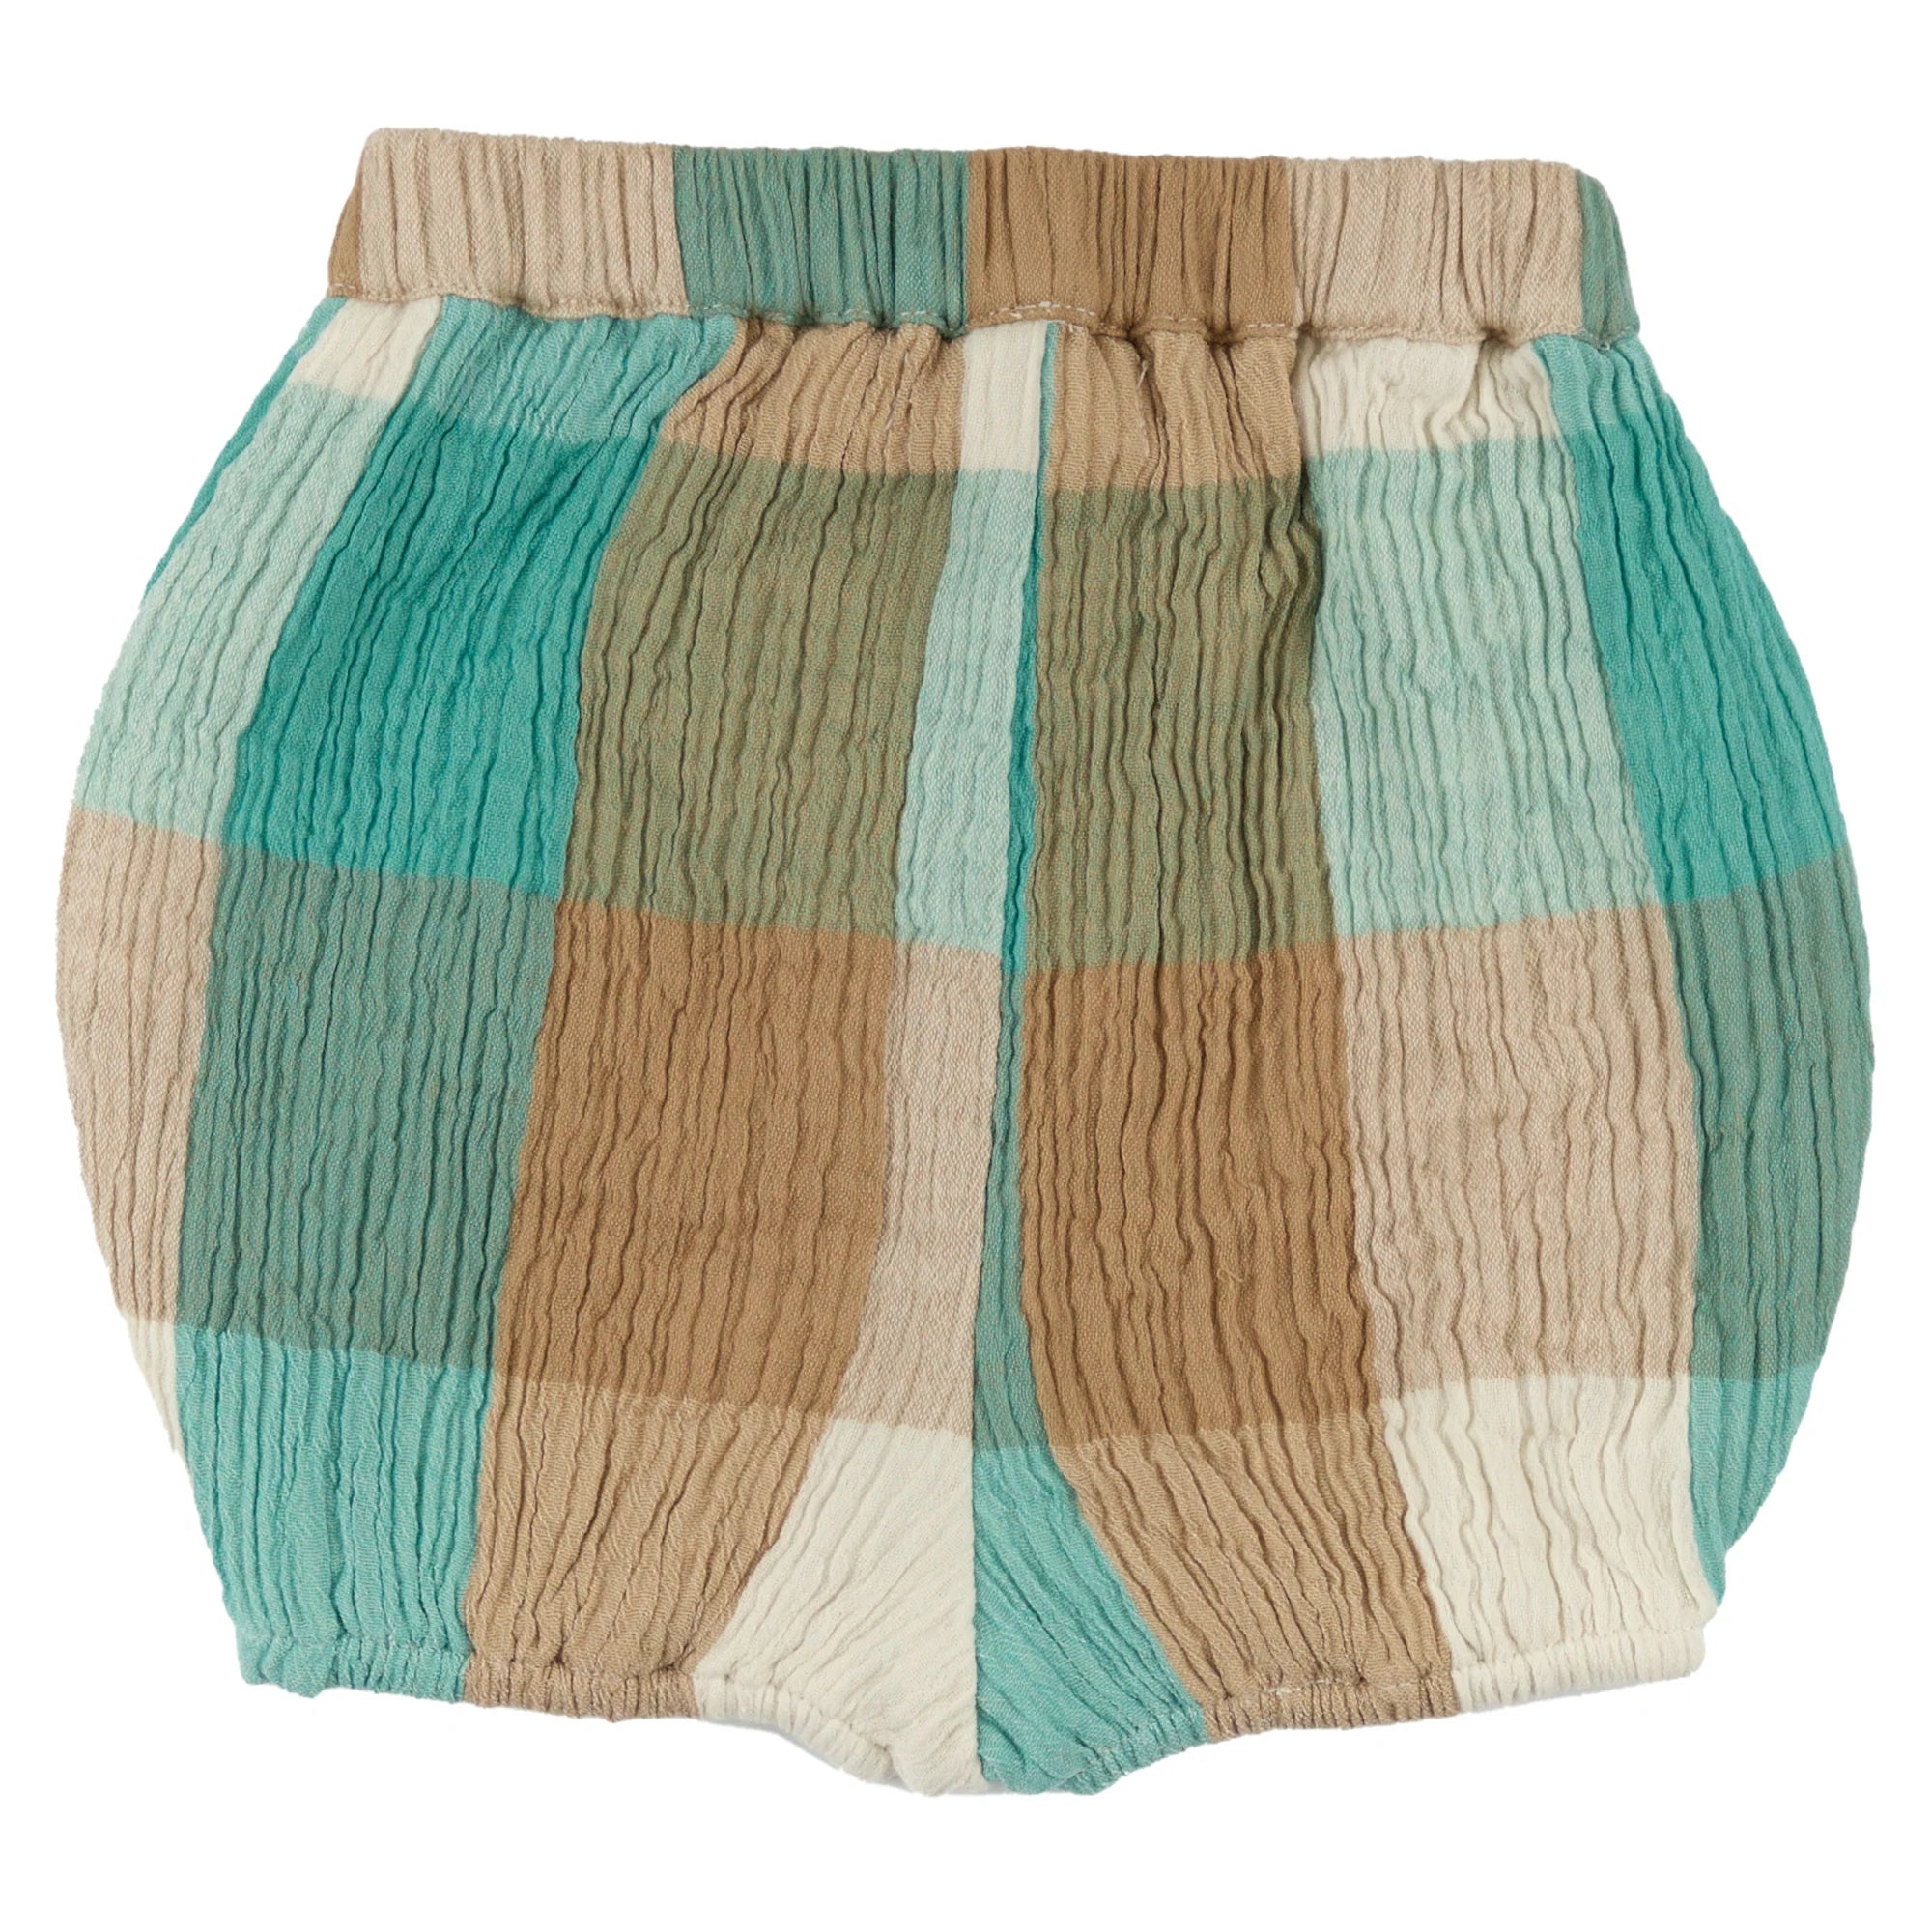 Bloomers (Muslin Check) Turquoise /Taupe